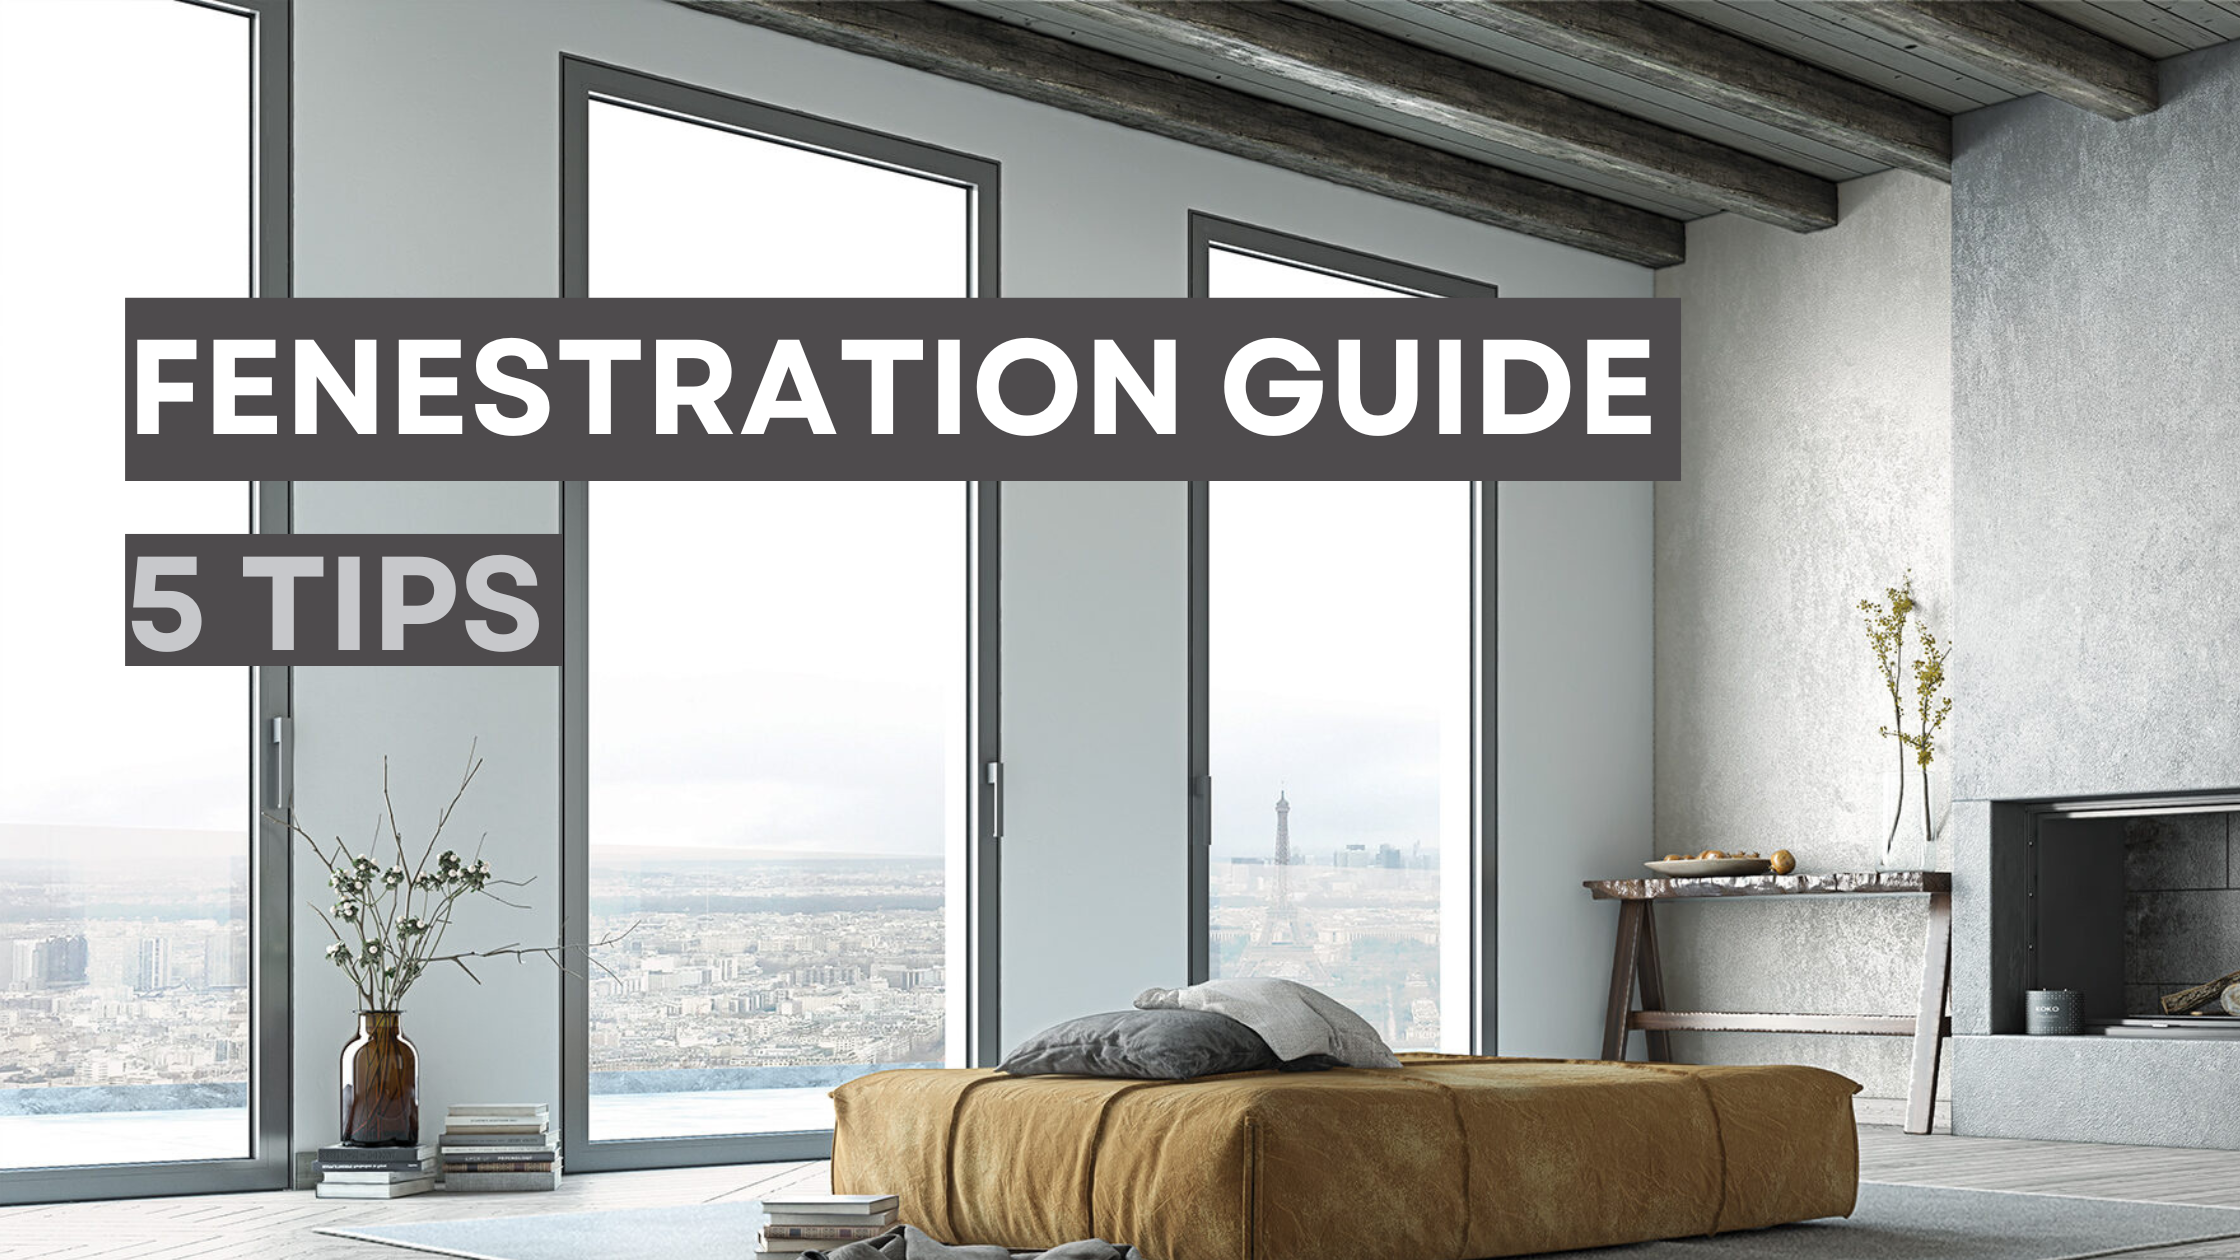 Fenestration Guide: Choose the right fenestration for your project